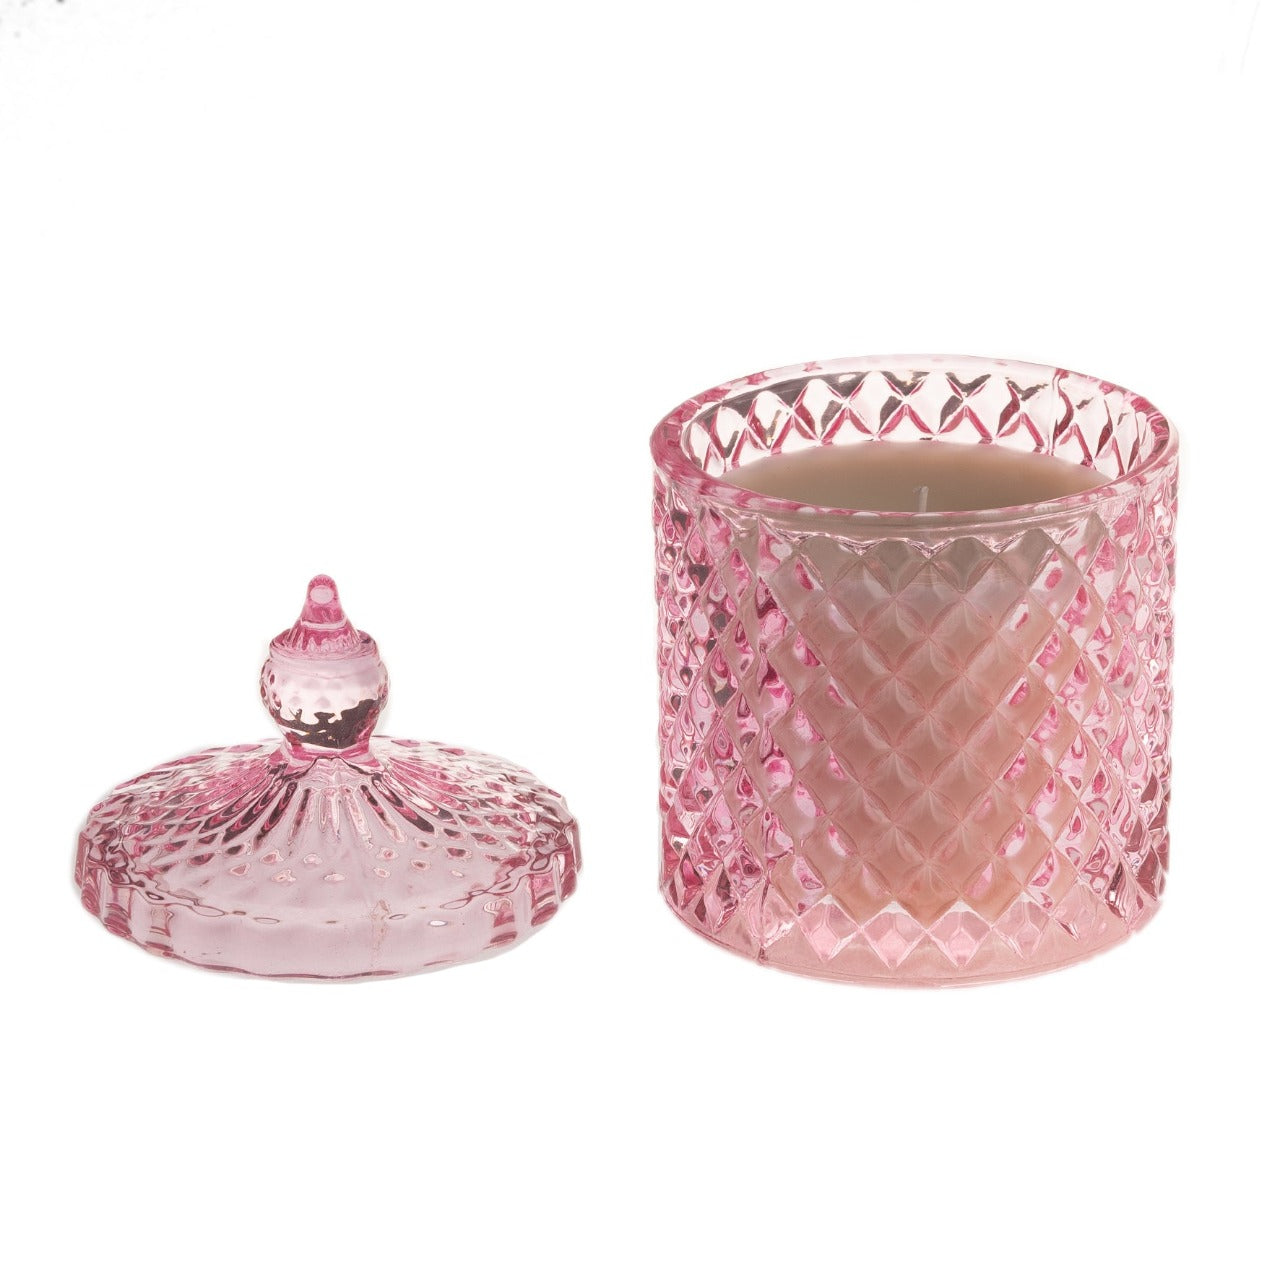 Opulence Rose, Spiced Cardamom & Pink Pepper Candle Jar  Inspired by the grace and unique beauty of the peacock, Opulence guarantees a majestical and serene Christmas. With contemporary bold night colours and embellished gold foils, these luxury gifts bring the fairy tale fantasy to life with their decorative textures and dazzling style.